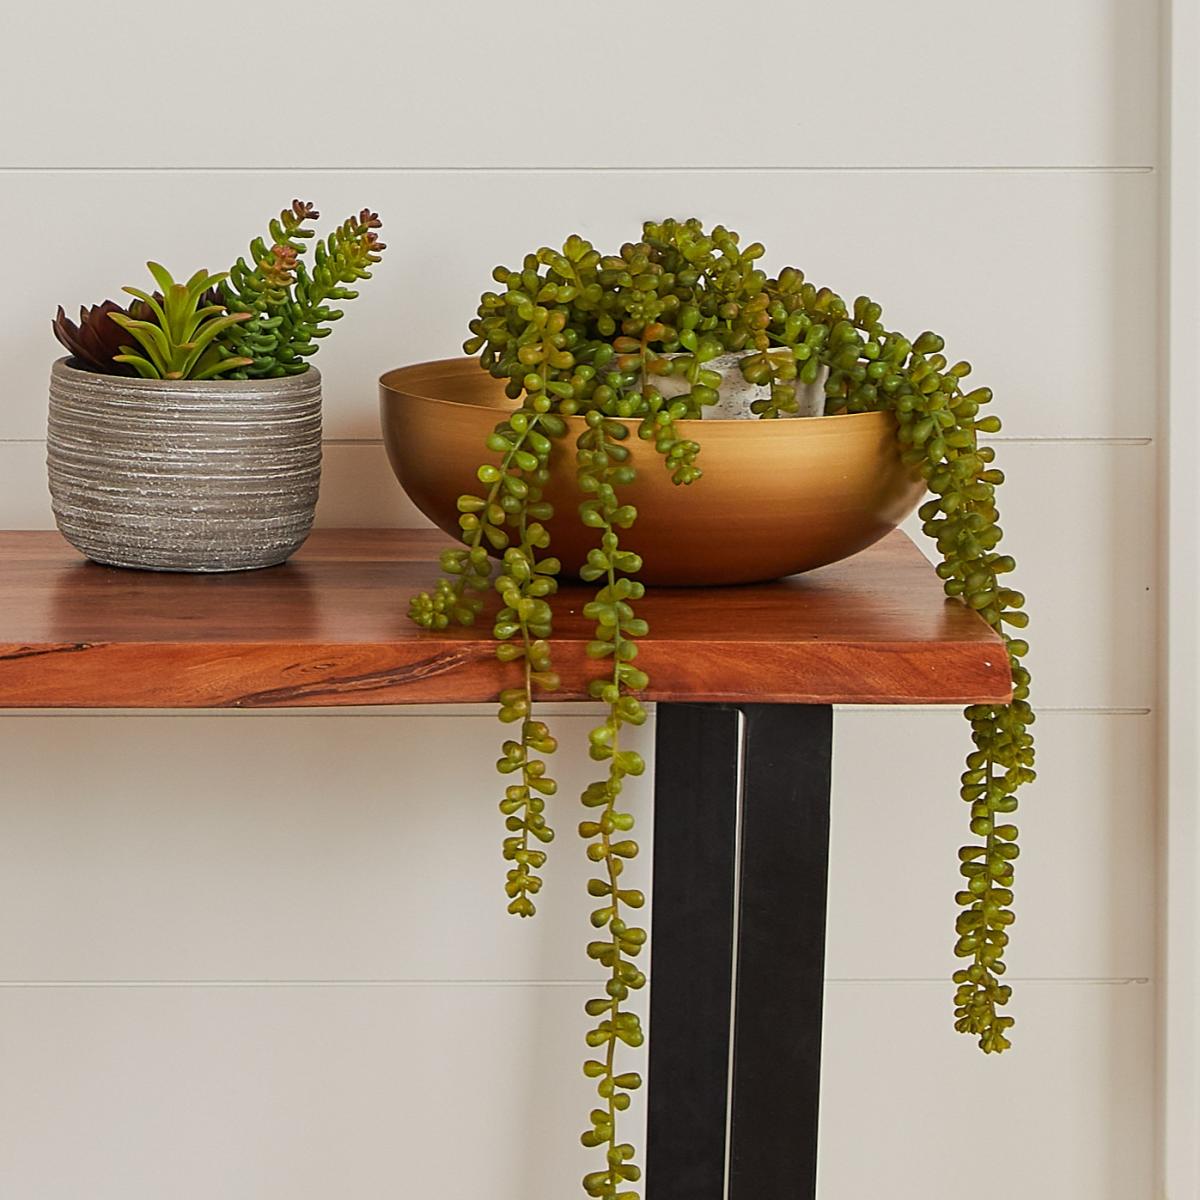 Accents Plants on Table 08242021 - NBG Home Charleston - LIFESTYLE2738